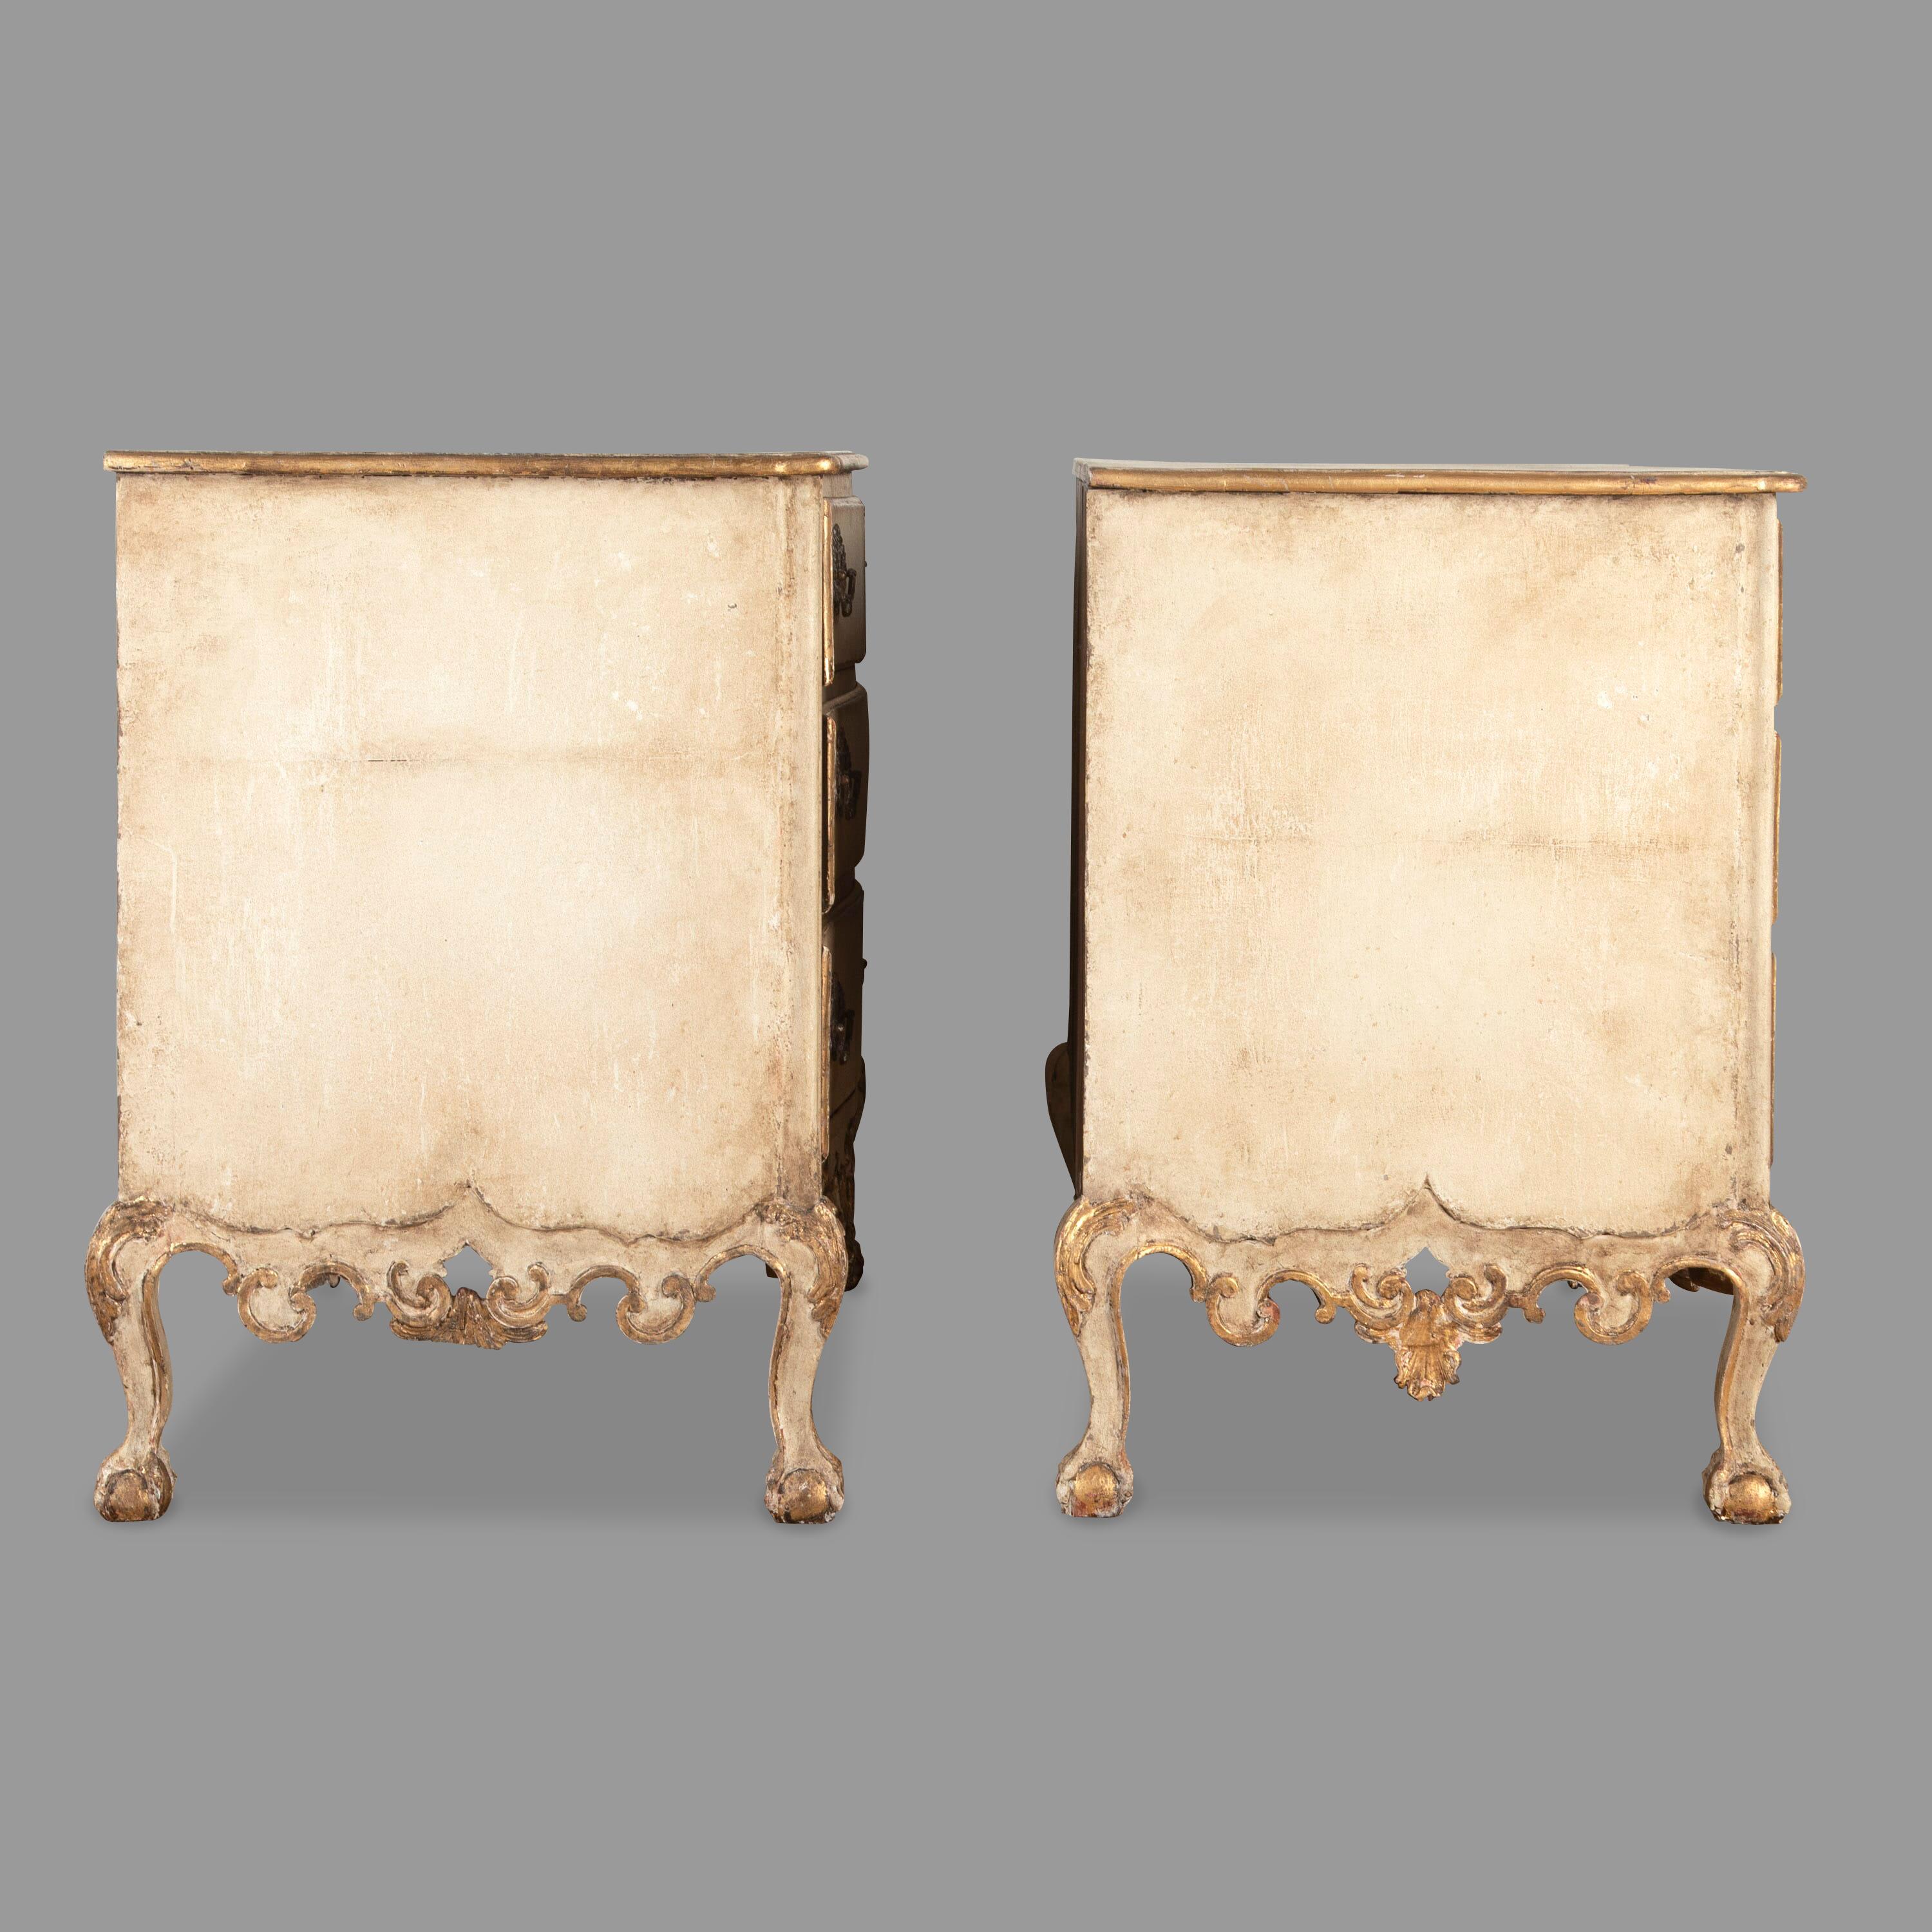 pair of C18th Portuguese serpentine decorated commodes  For Sale 2